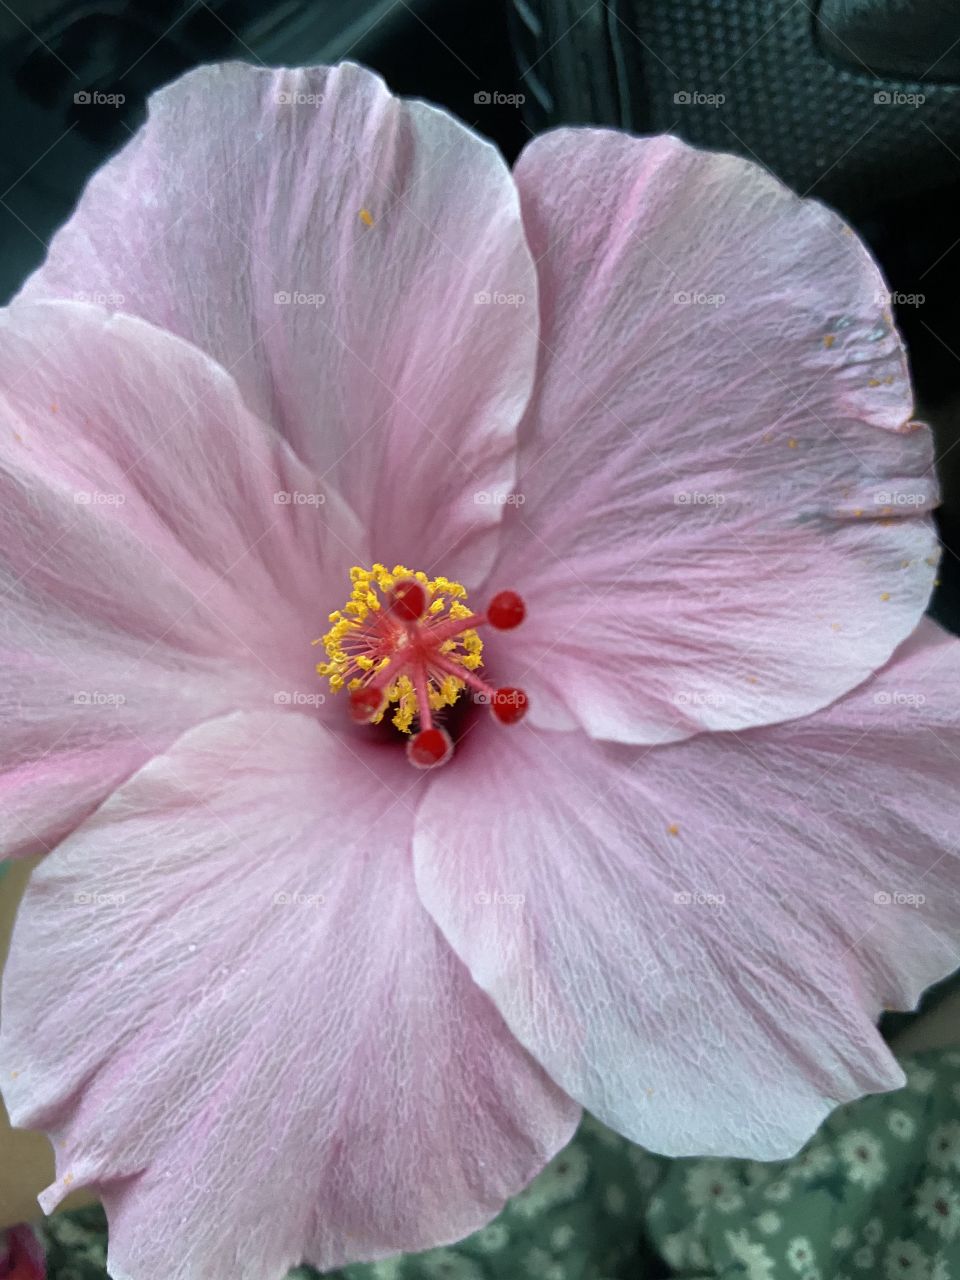 Soft, pale pink hibiscus flower petals and yellow center. 